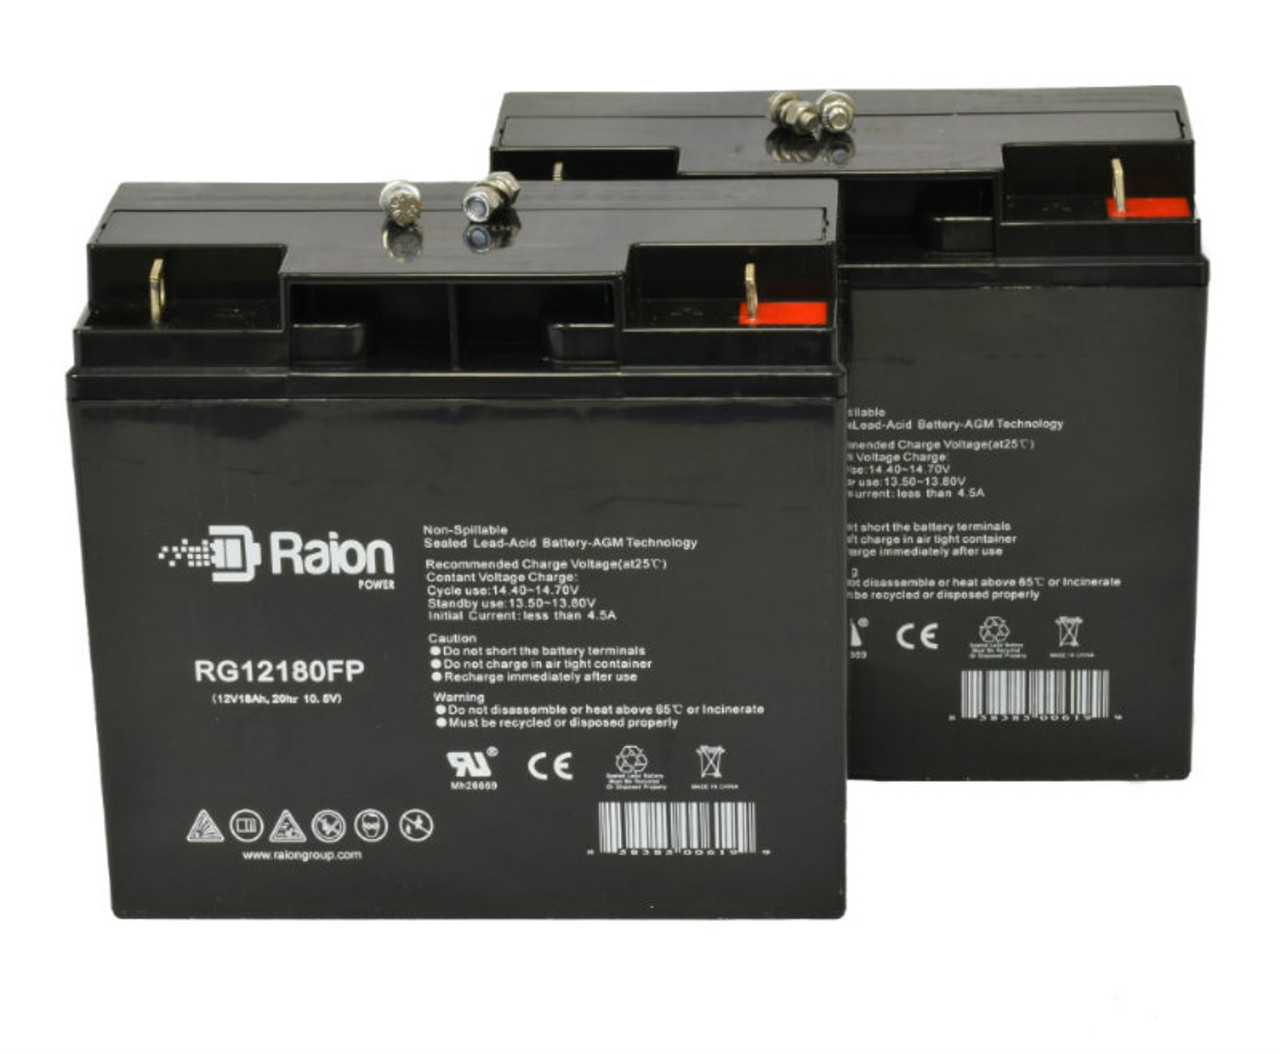 Raion Power Replacement RG12180FP 12V 18Ah Emergency Light Battery for Simplex 92680 - 2 Pack